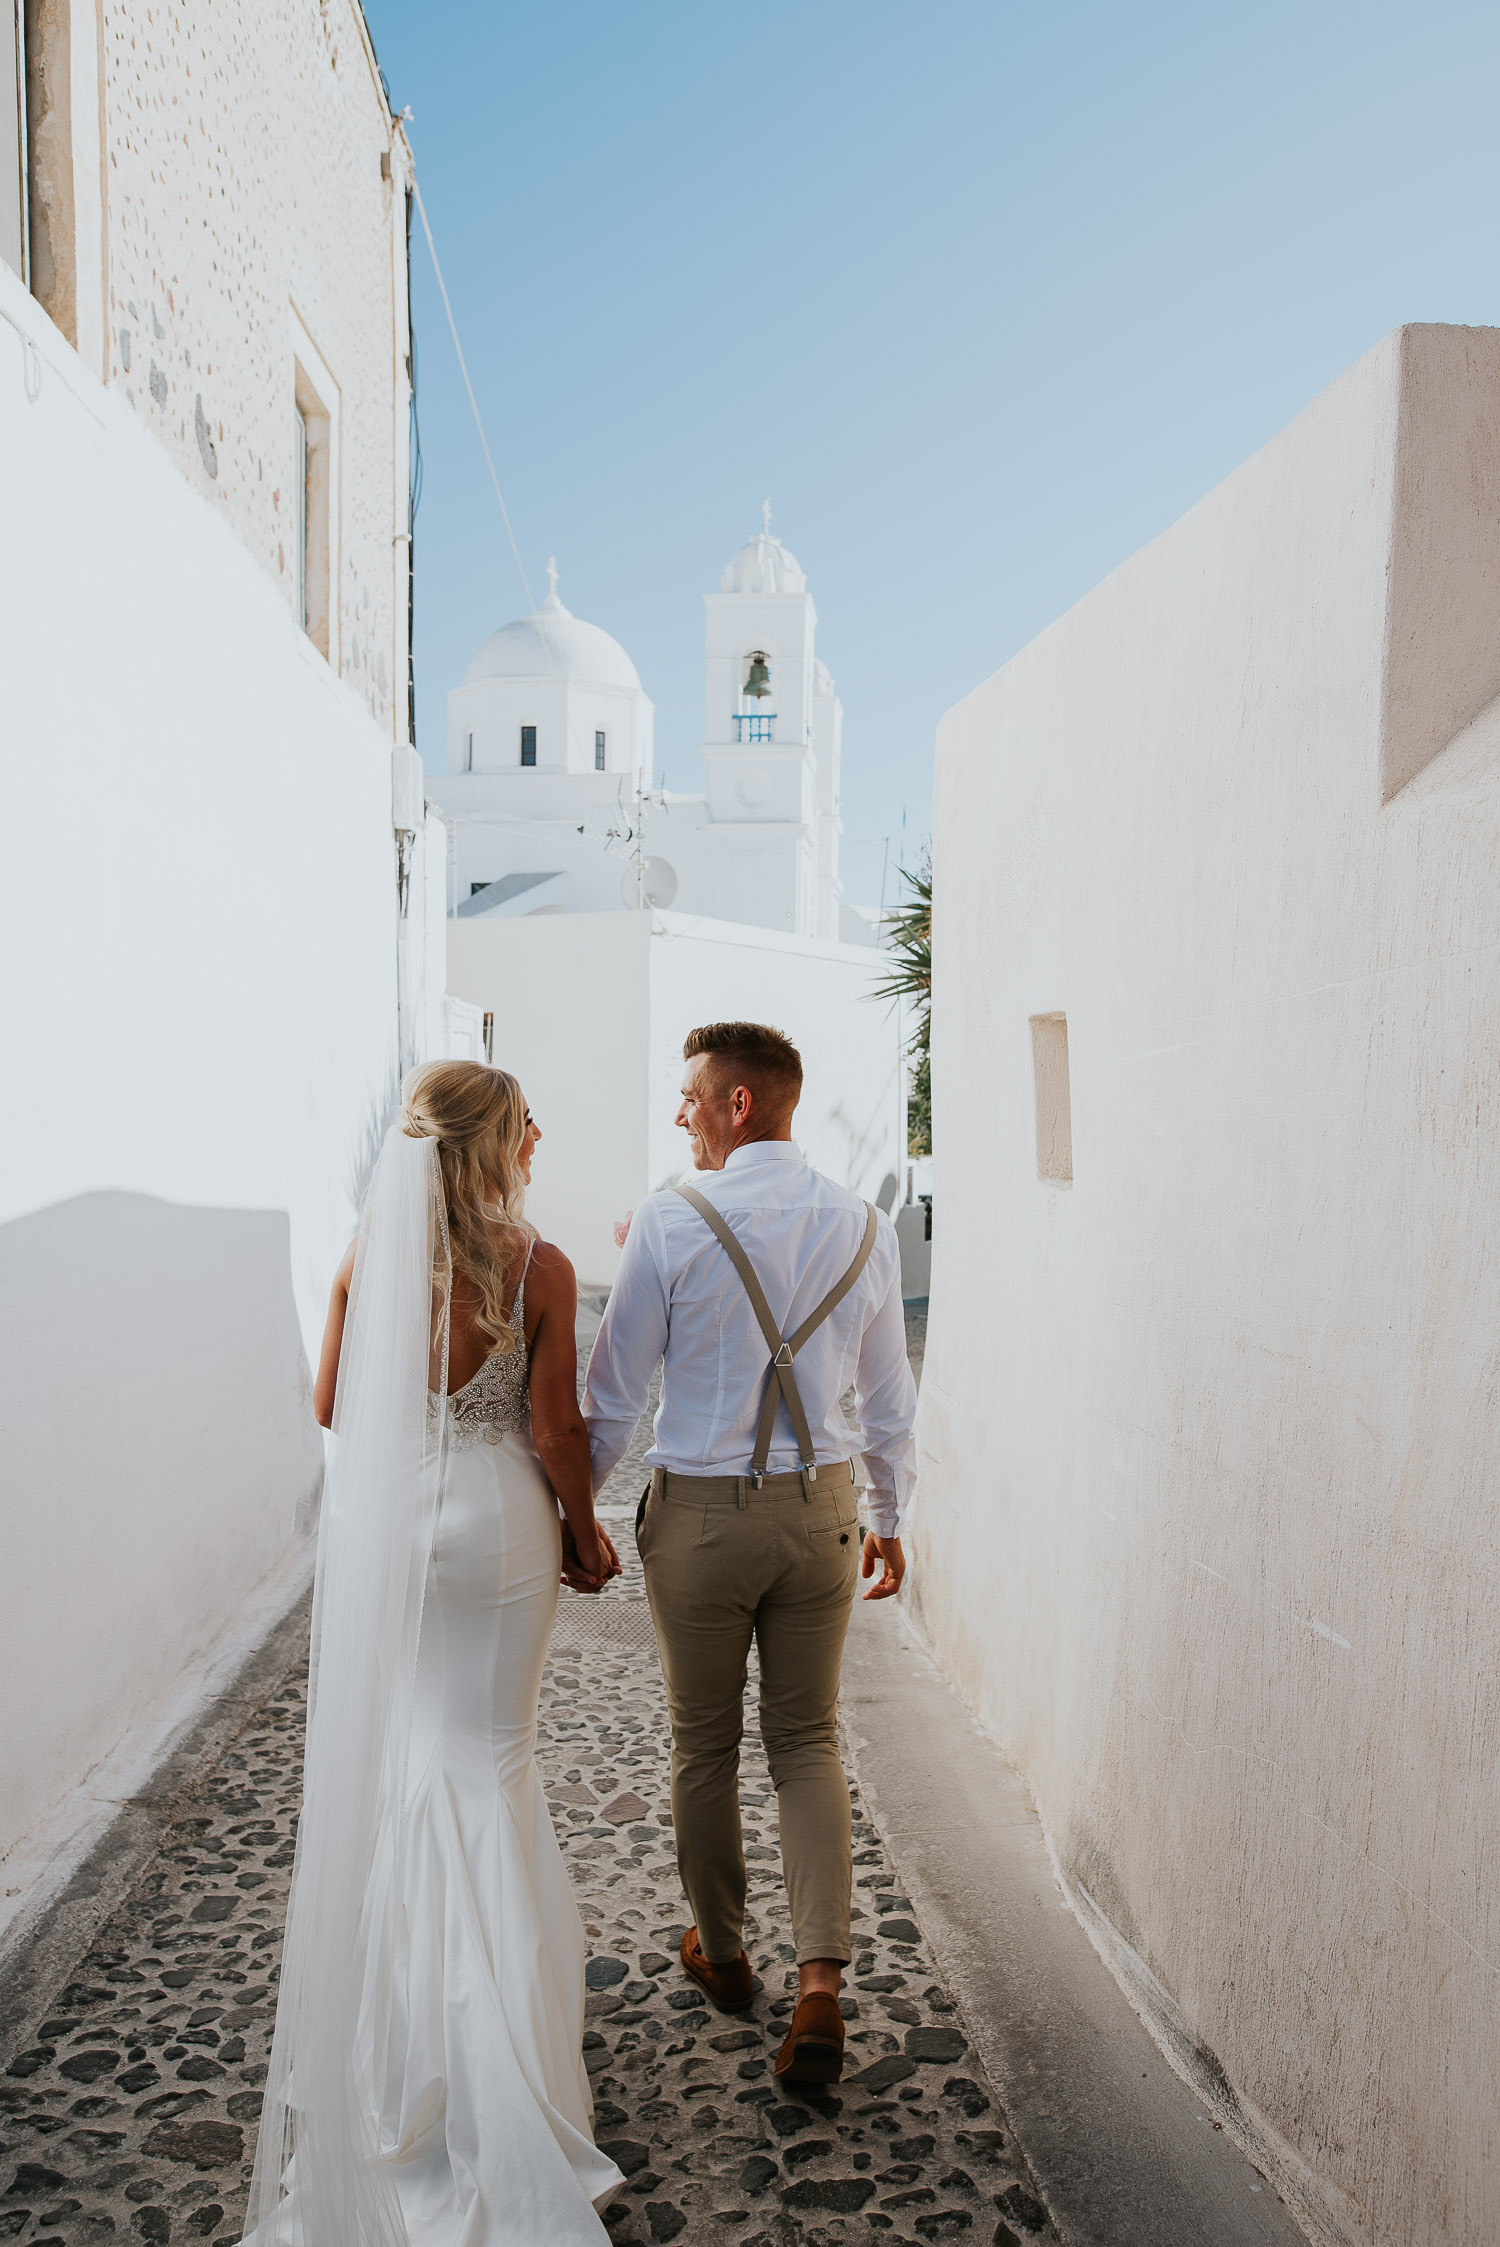 Wedding photographer Santorini: bride and groom walking on a cobbled stone lane with the church in the background by Ben and Vesna.